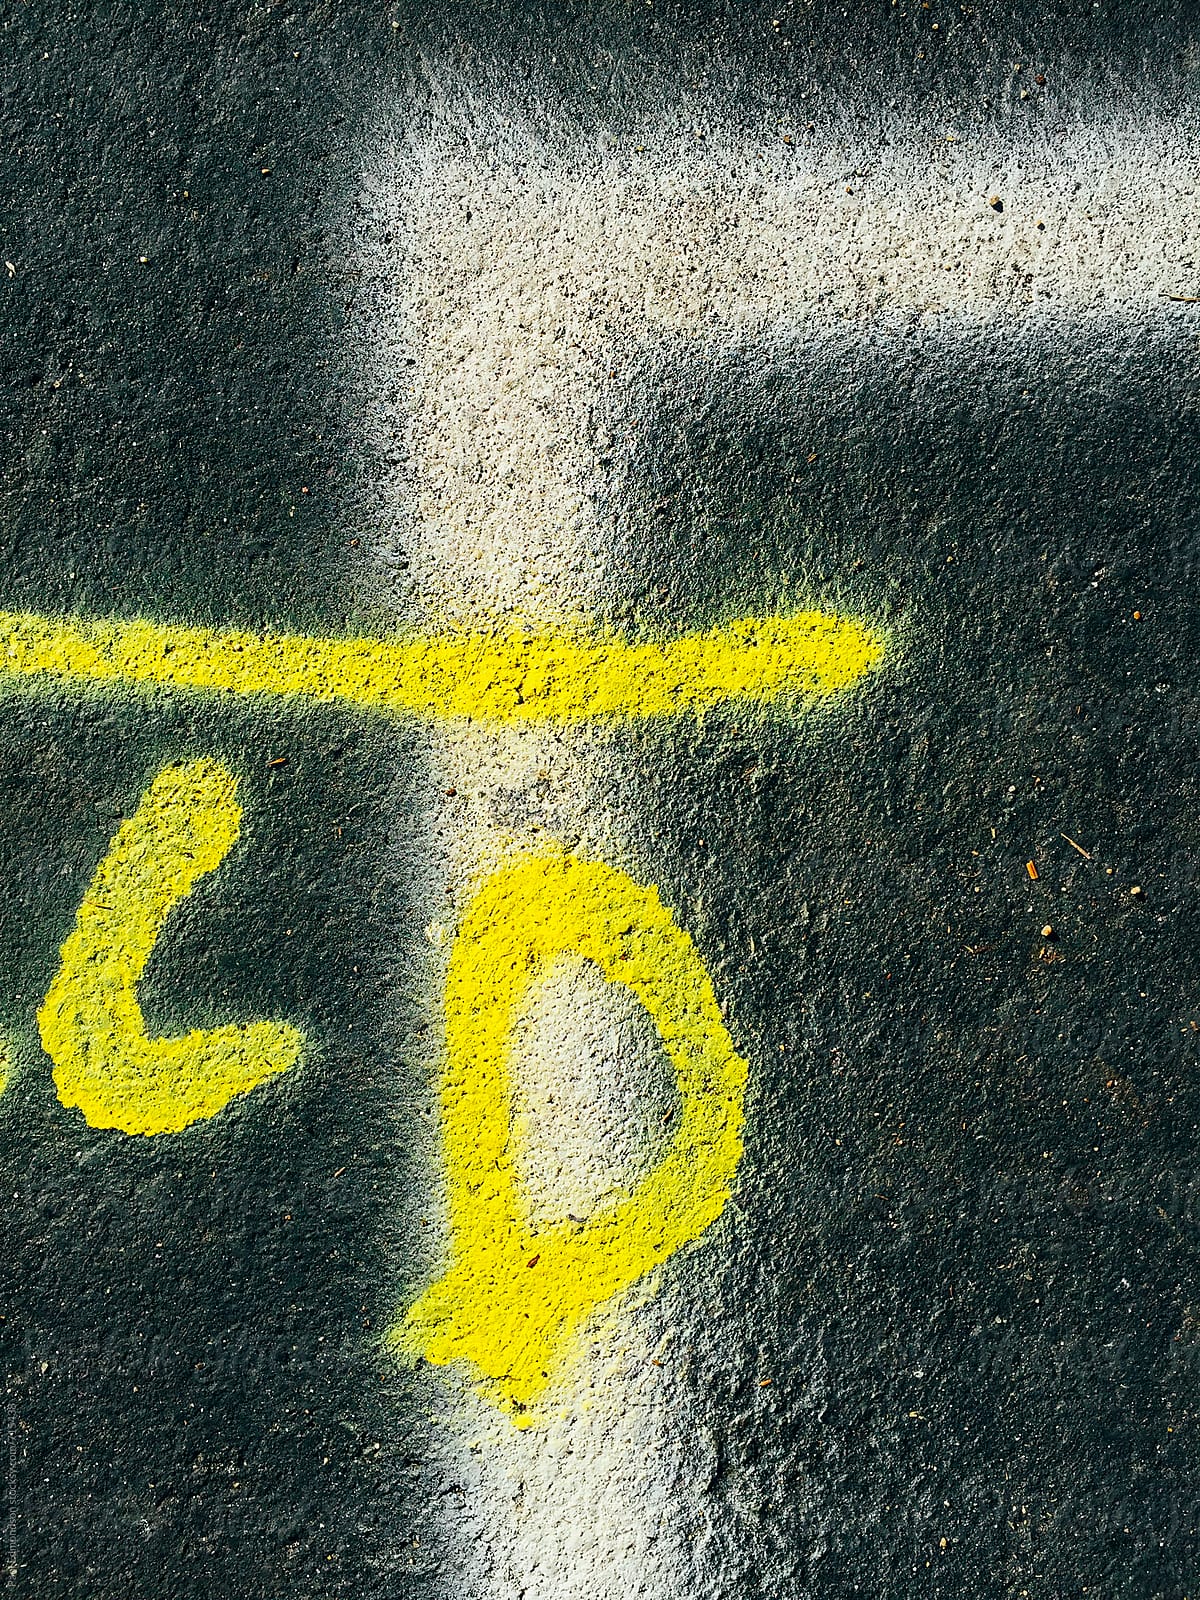 Painted lettering and lines on urban street, close up